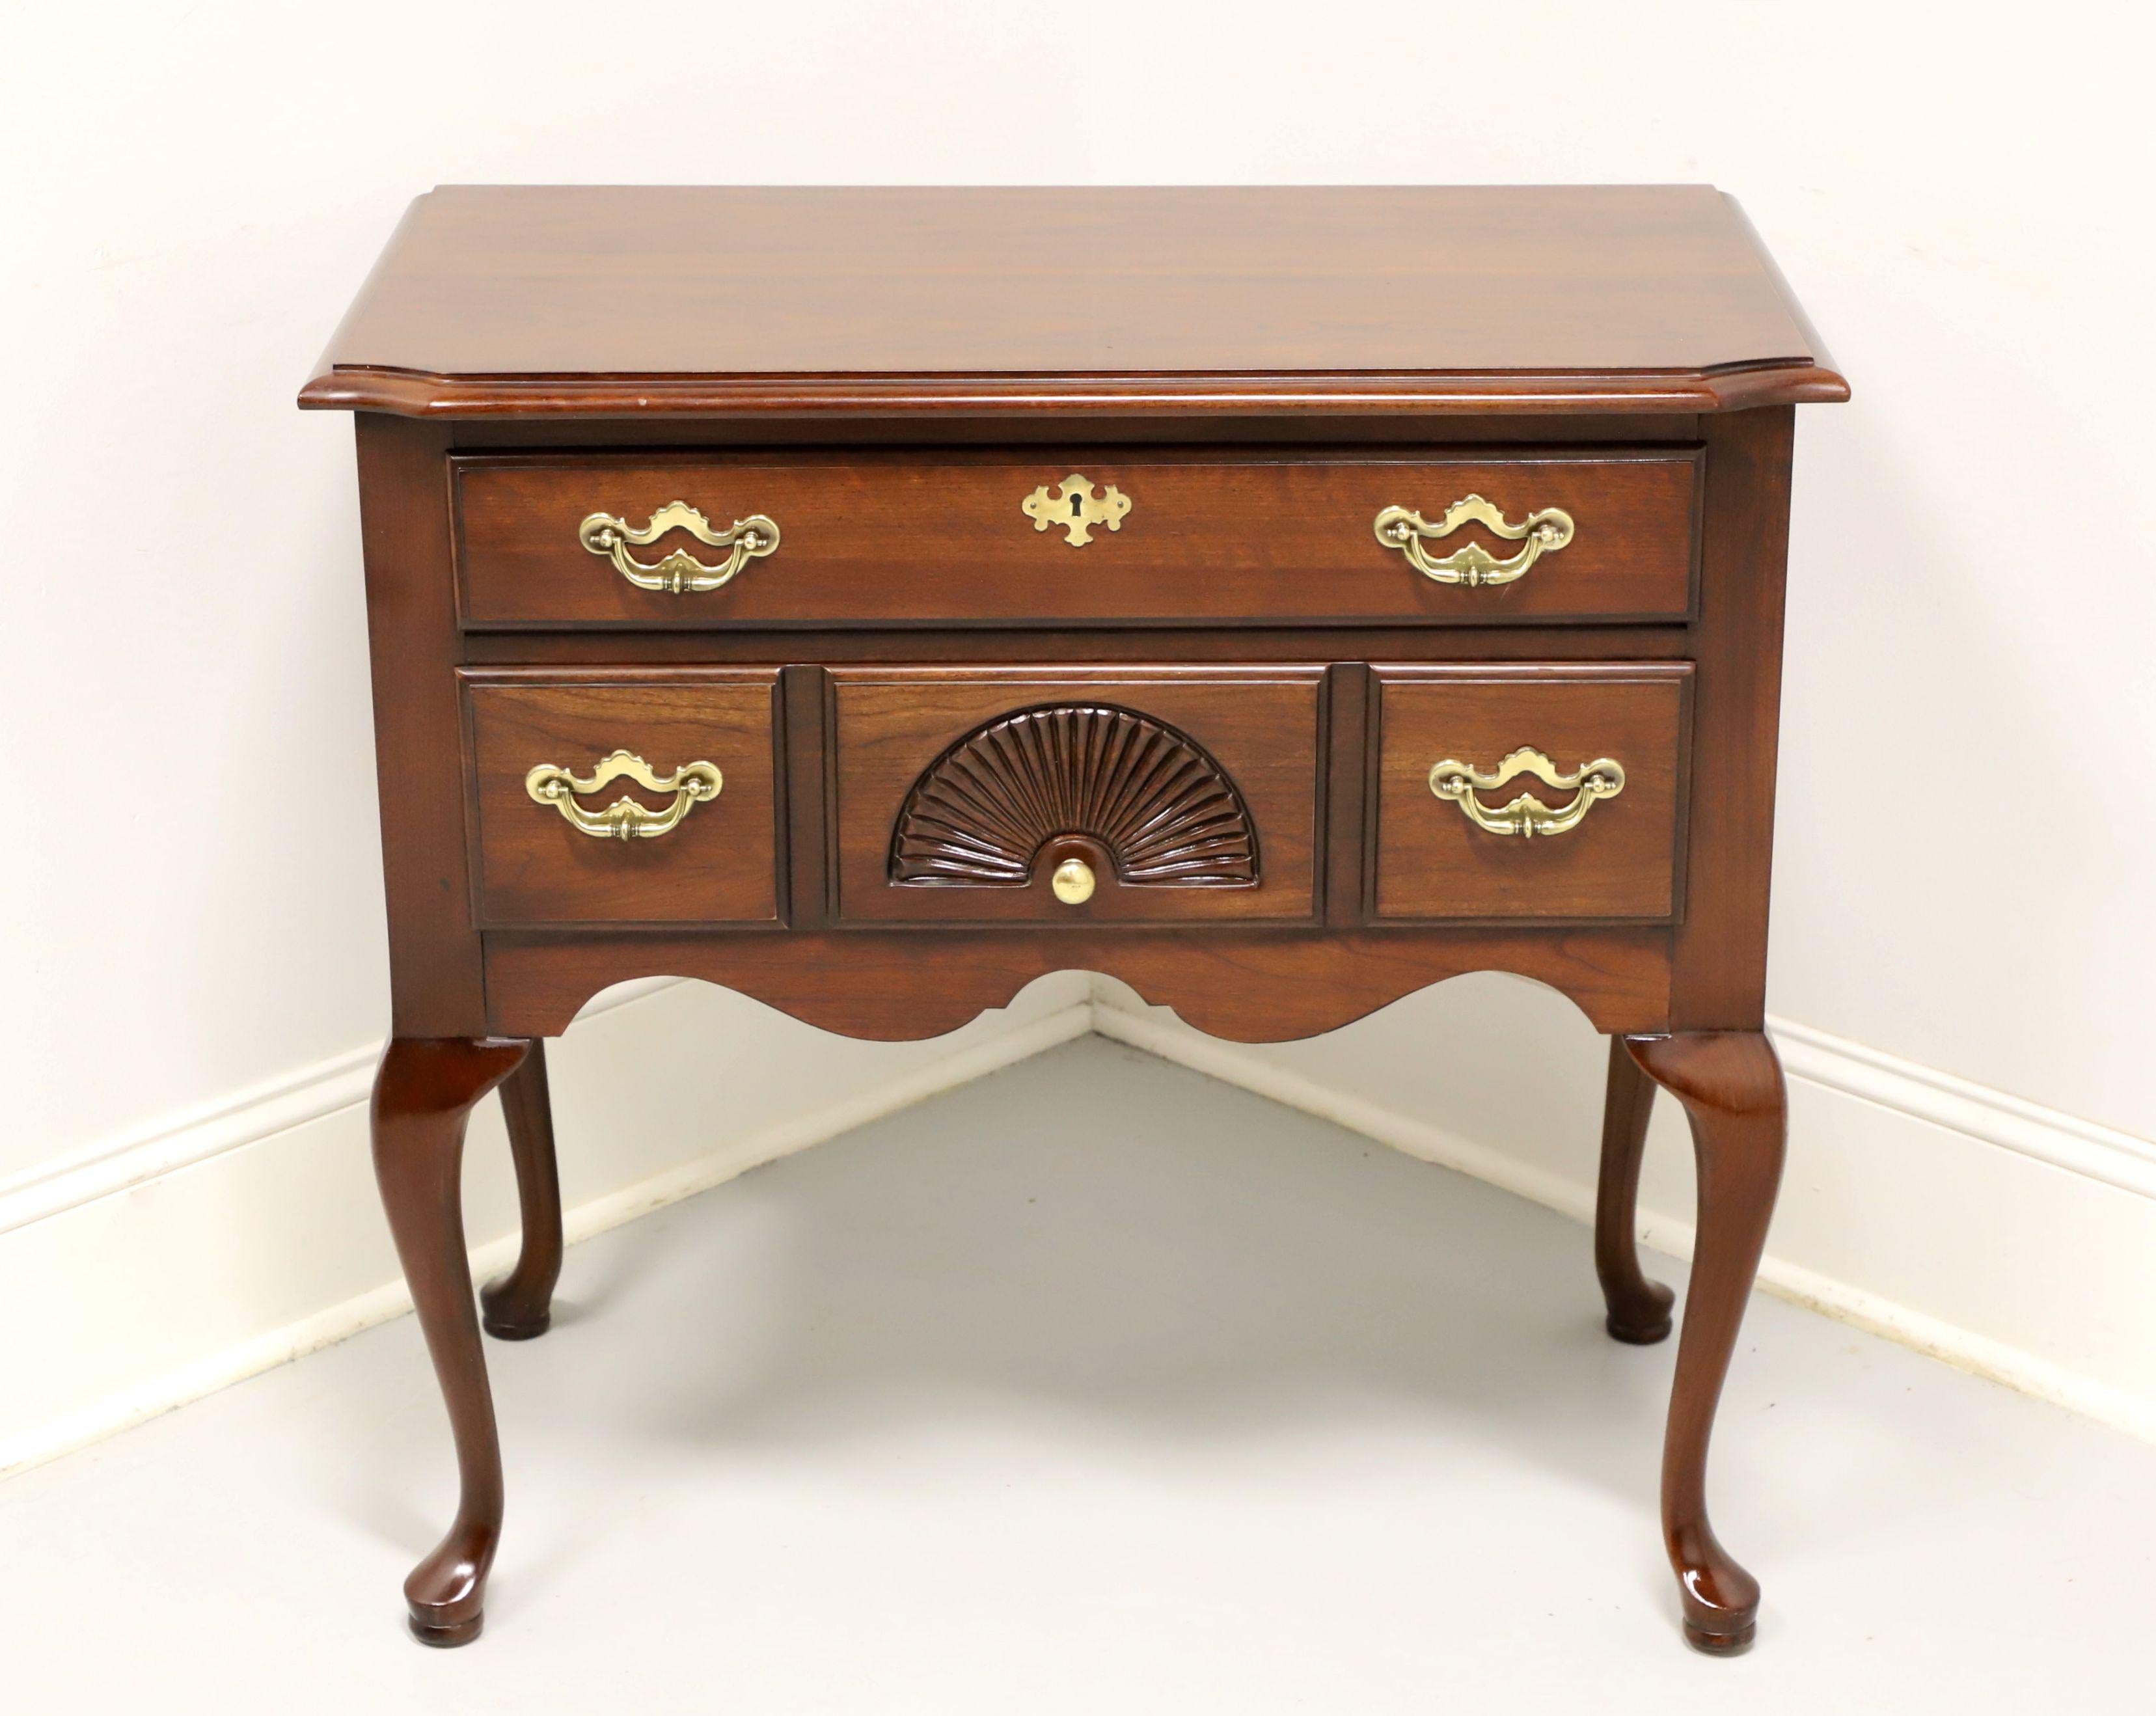 A Queen Anne style lowboy chest by Thomasville. Cherry with brass hardware, carved apron, cabriole legs and pad feet. Features one upper over three lower dovetail drawers, upper has faux keyhole escutcheon and center lower with carved fan. Made in